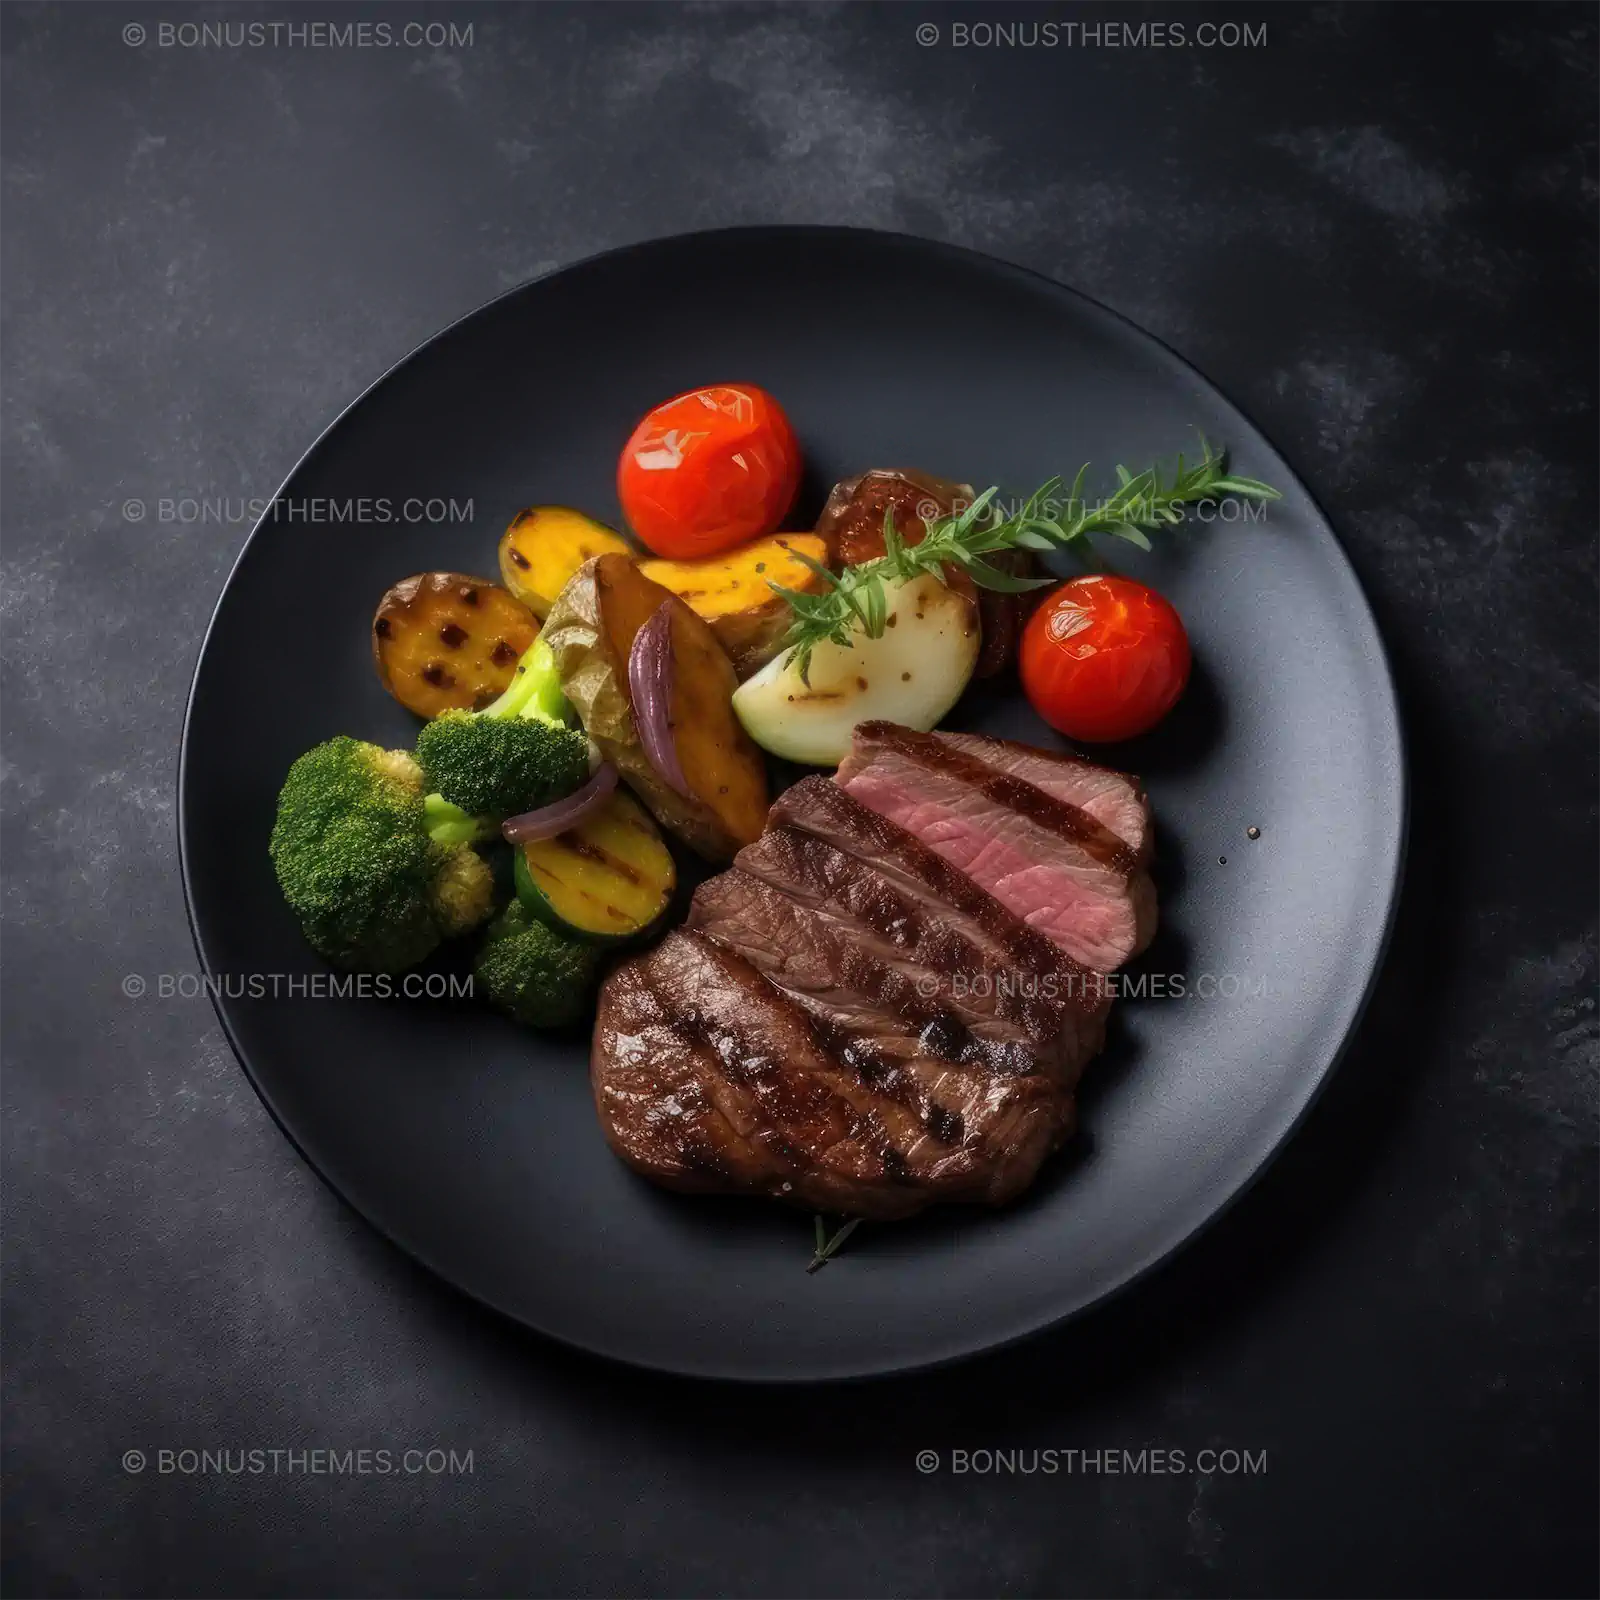 Succulent beef steak with grilled mixed vegetables on a dark background